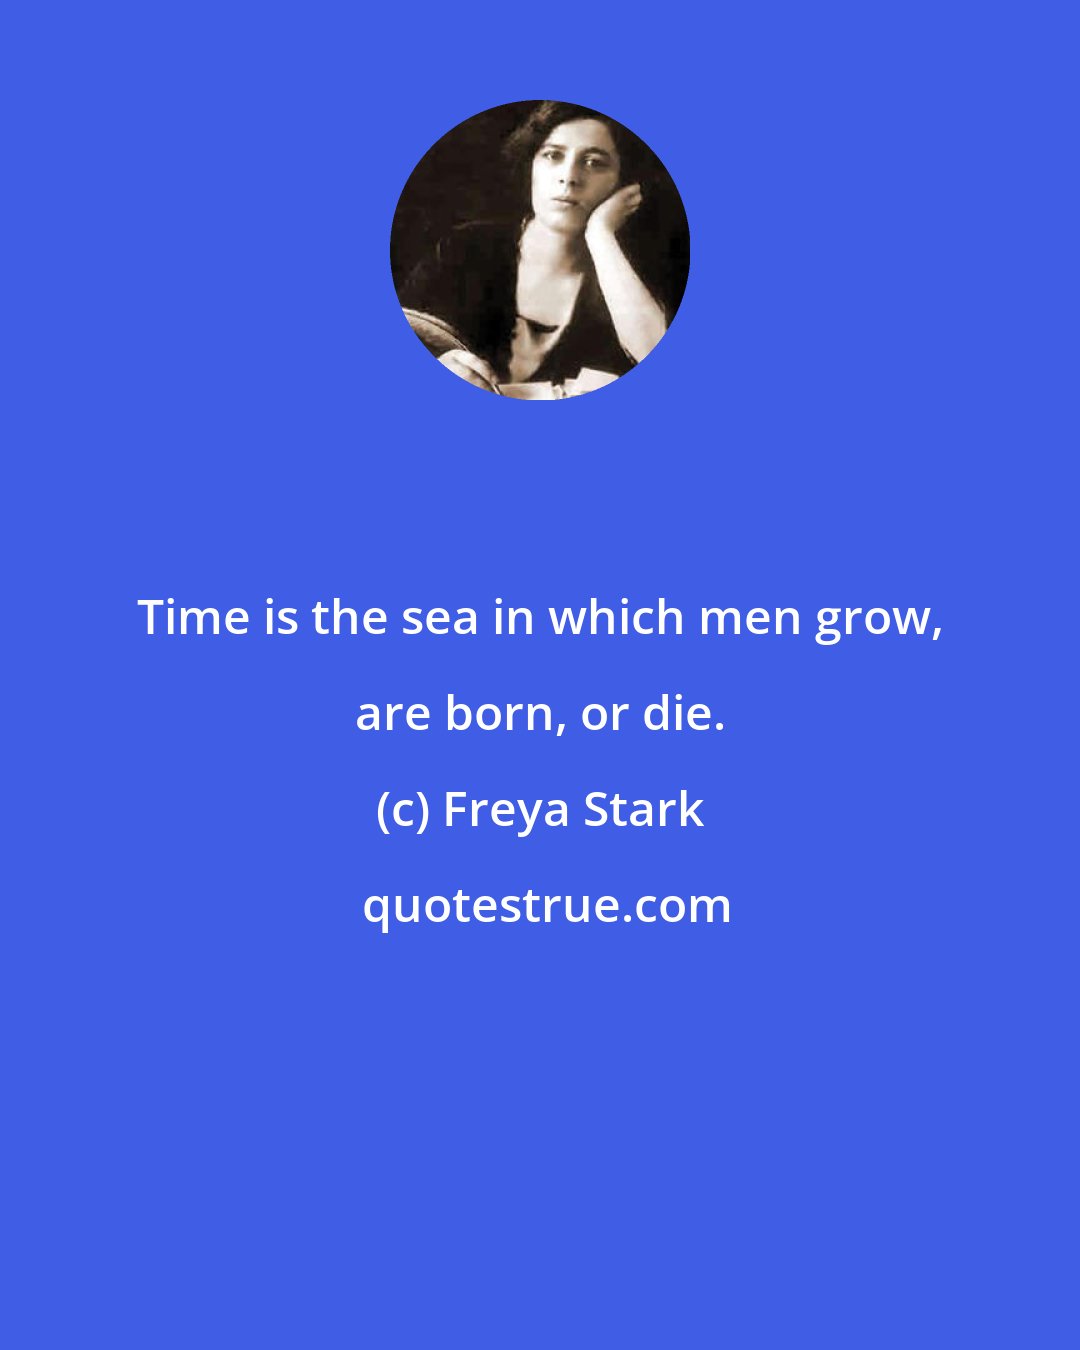 Freya Stark: Time is the sea in which men grow, are born, or die.